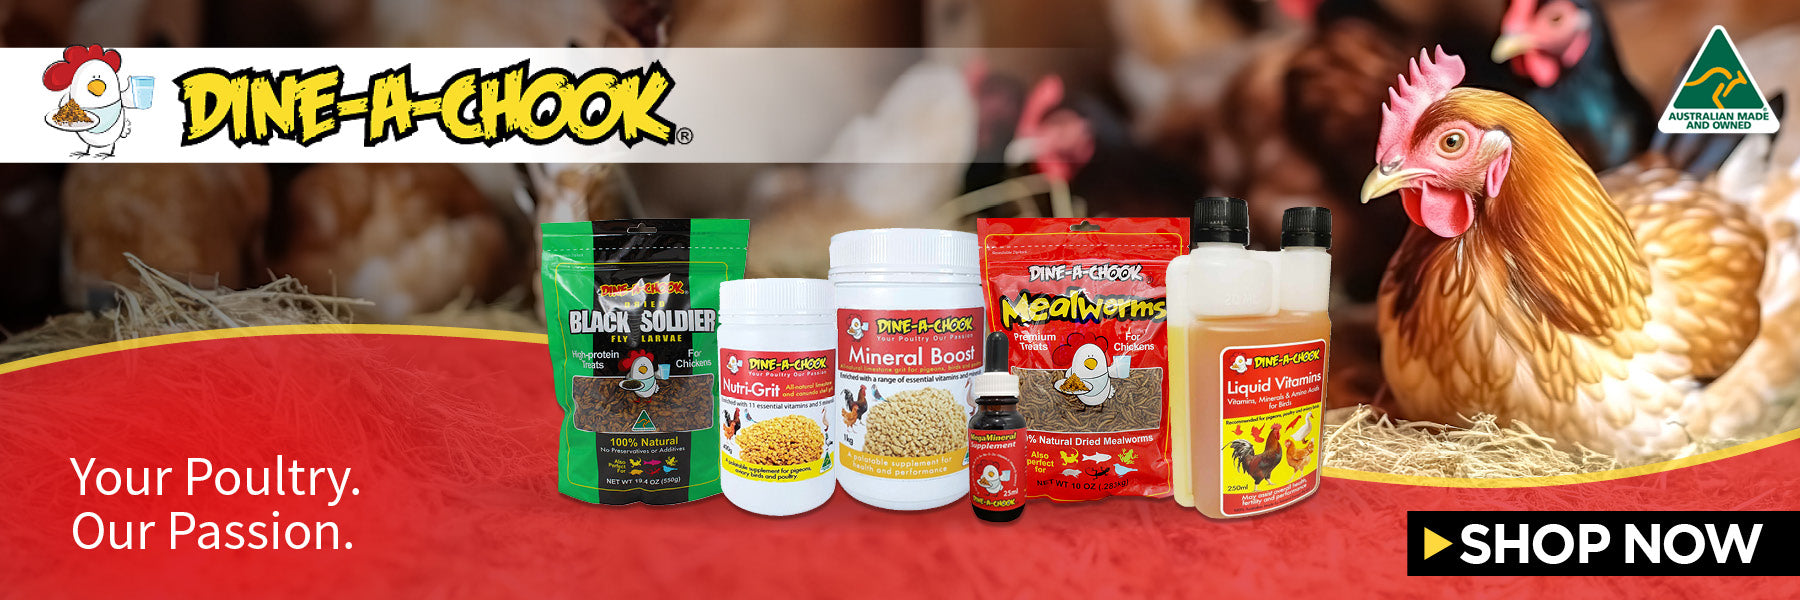 Dine A Chook Australian Made products for chickens